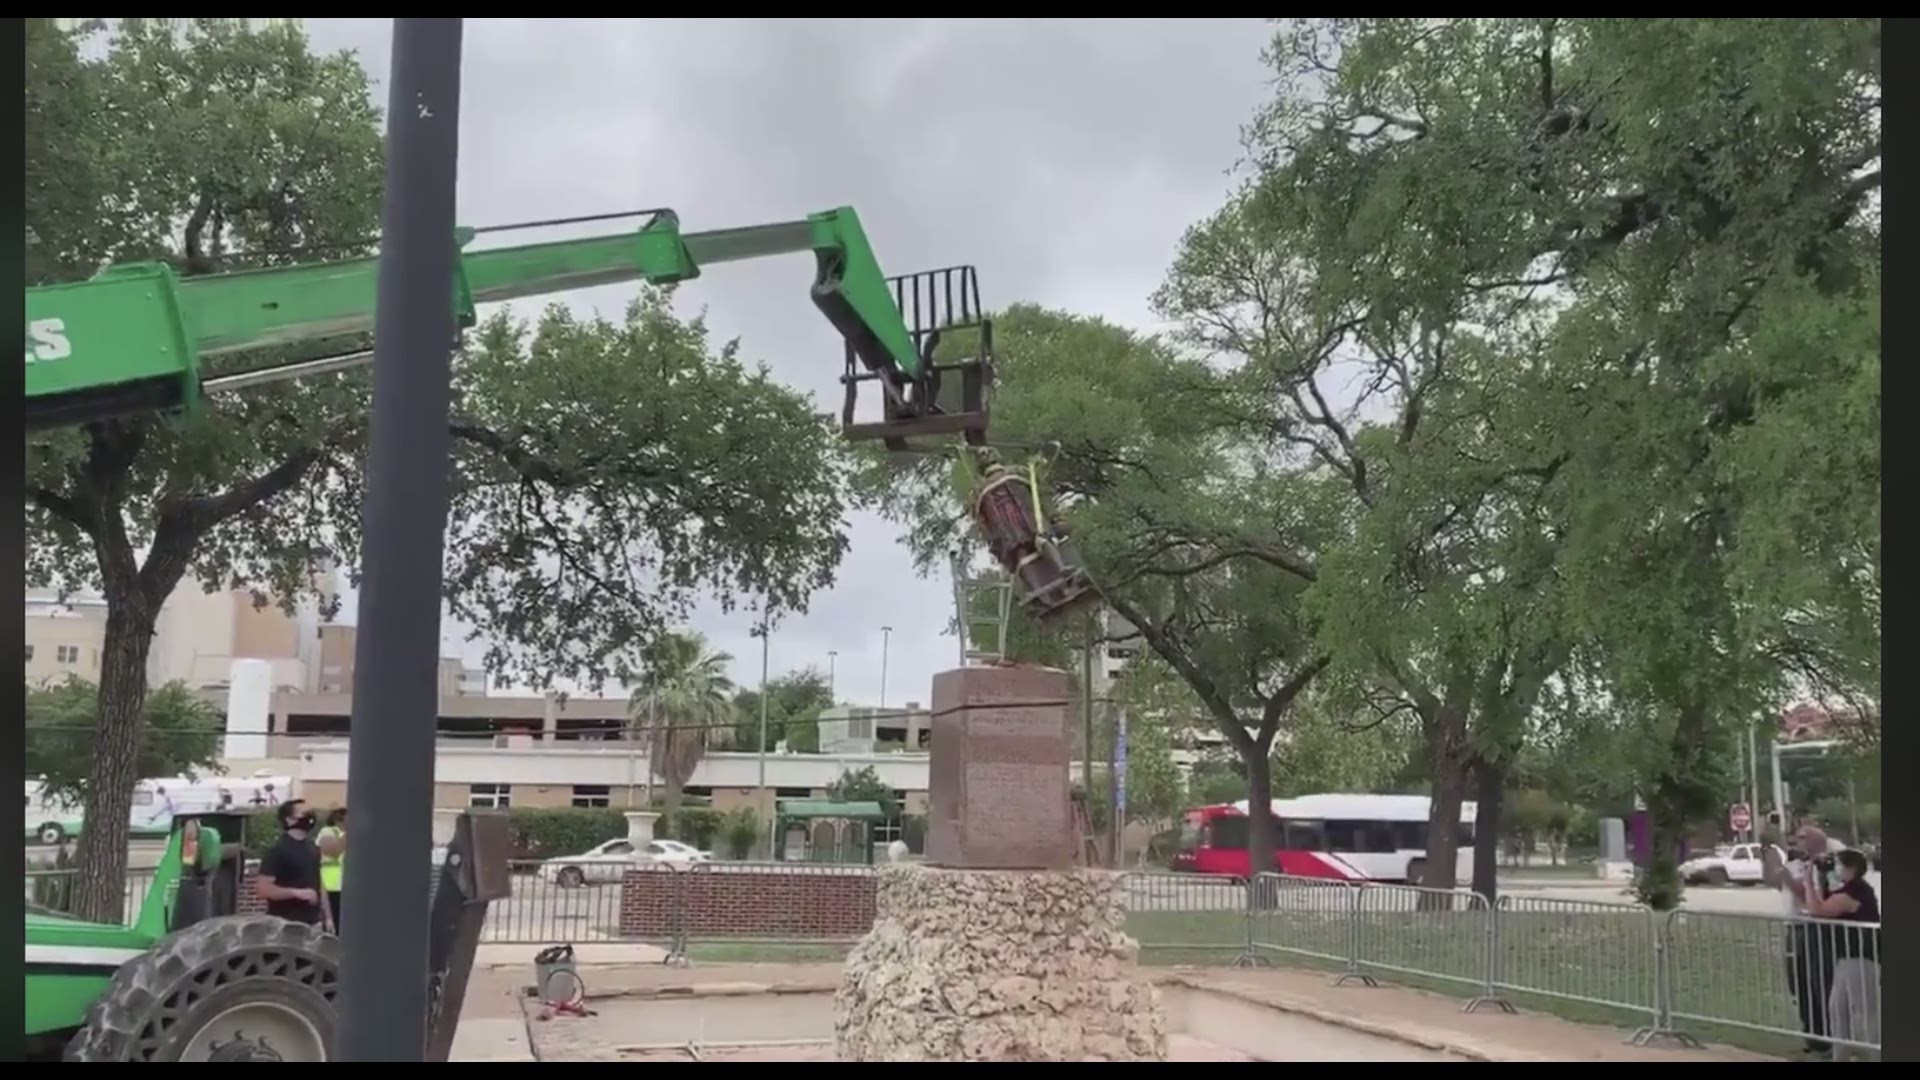 City crews removed the statue for cleaning before a city council vote to permanently remove it and return it to the Christopher Columbus Italian Society.